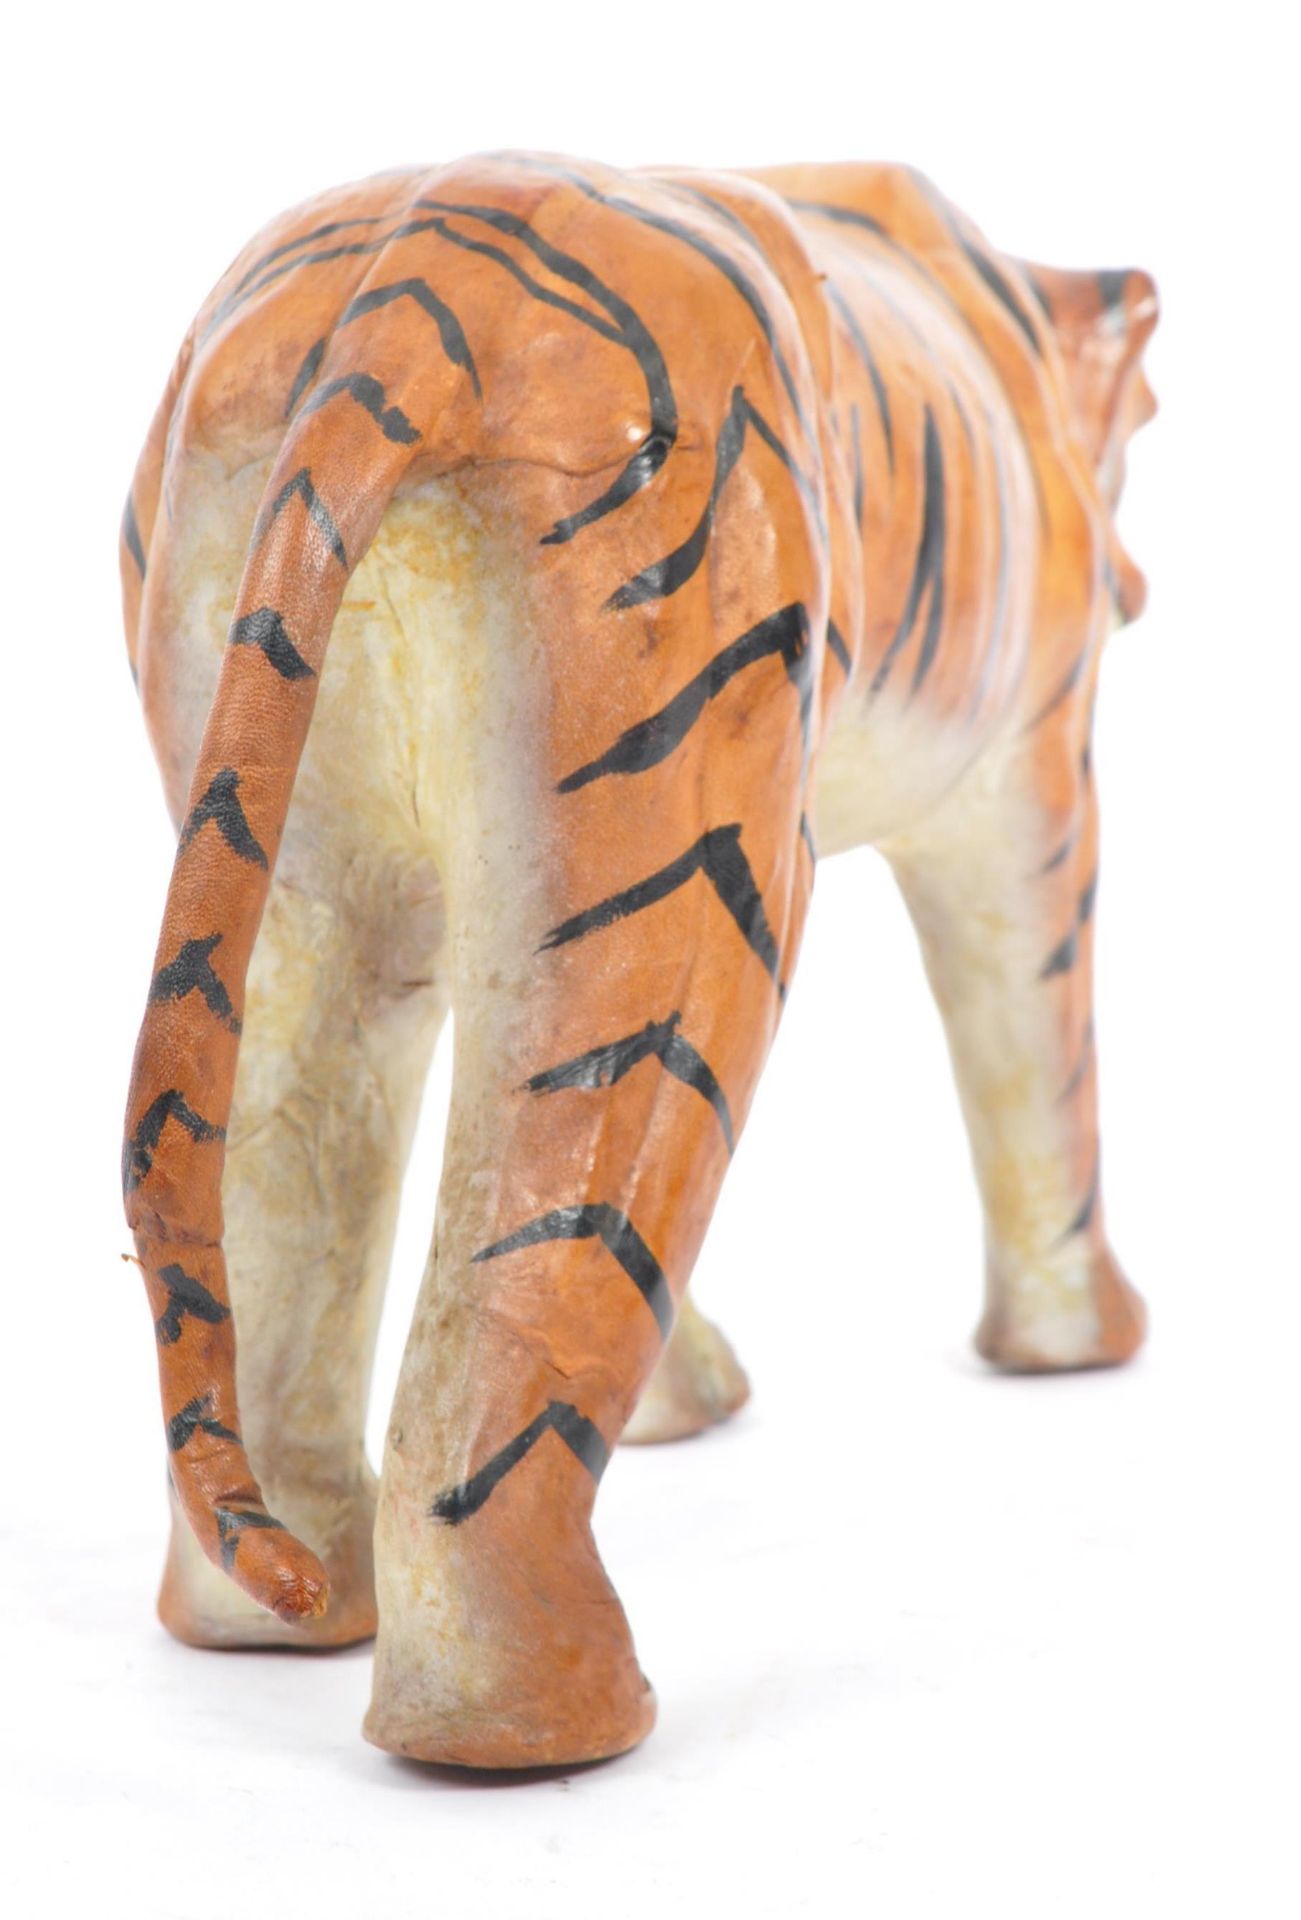 20TH CENTURY FRENCH PAINTED LEATHER TIGER FIGURE - Image 4 of 9